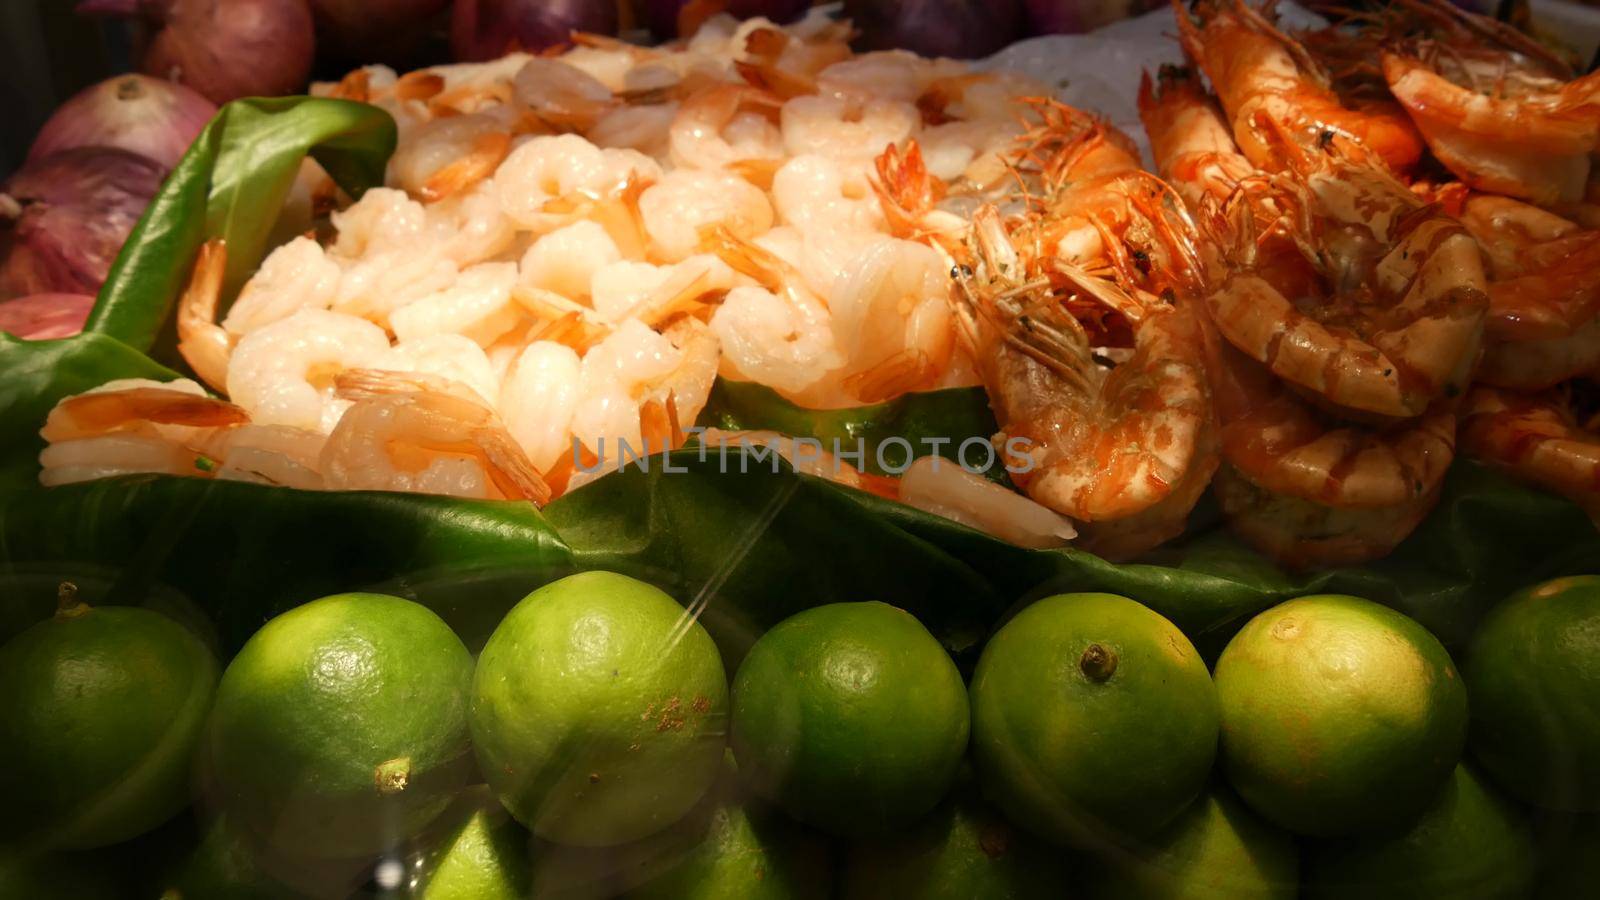 National Asian Exotic ready to eat seafood at night street market food court in Thailand. Delicious Grilled Prawns or Shrimps and other snacks